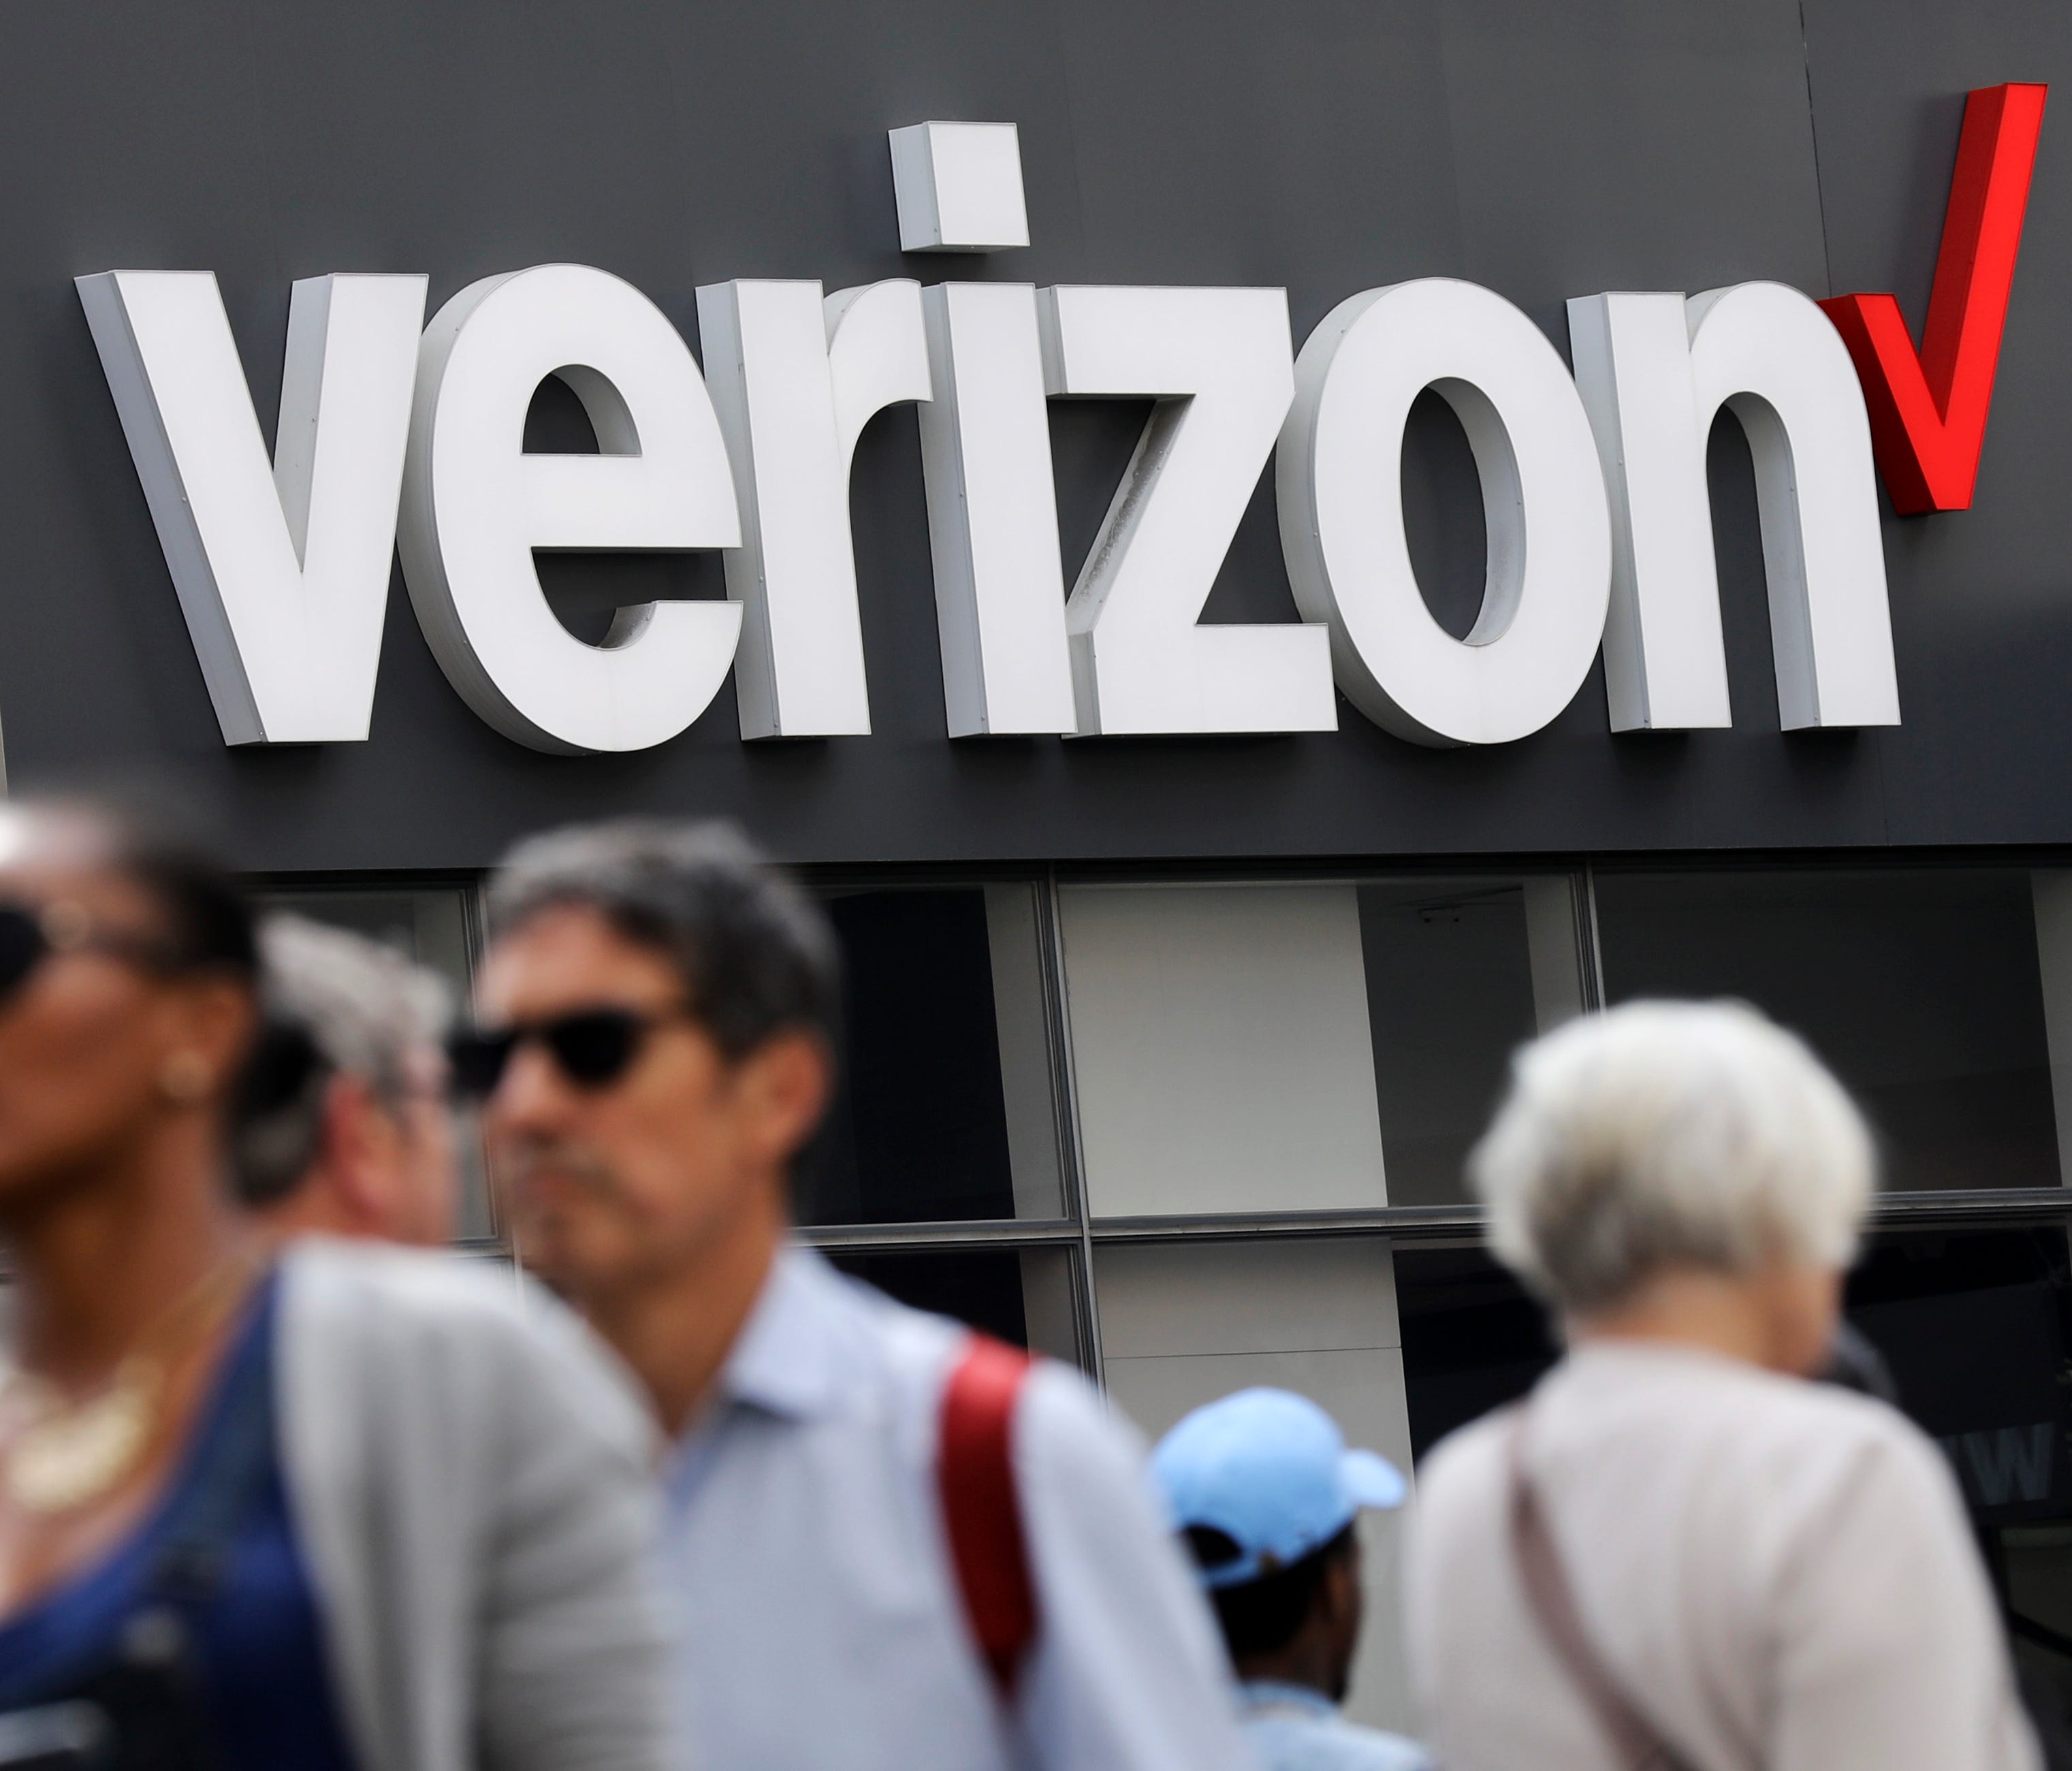 Outside a New York City Verizon store May 2, 2017. Verizon Communications is buying Straight Path Communications for about $3.1 billion, ending a bidding war with AT&T over the wireless licenses company, the companies said Thursday, May 11, 2017.